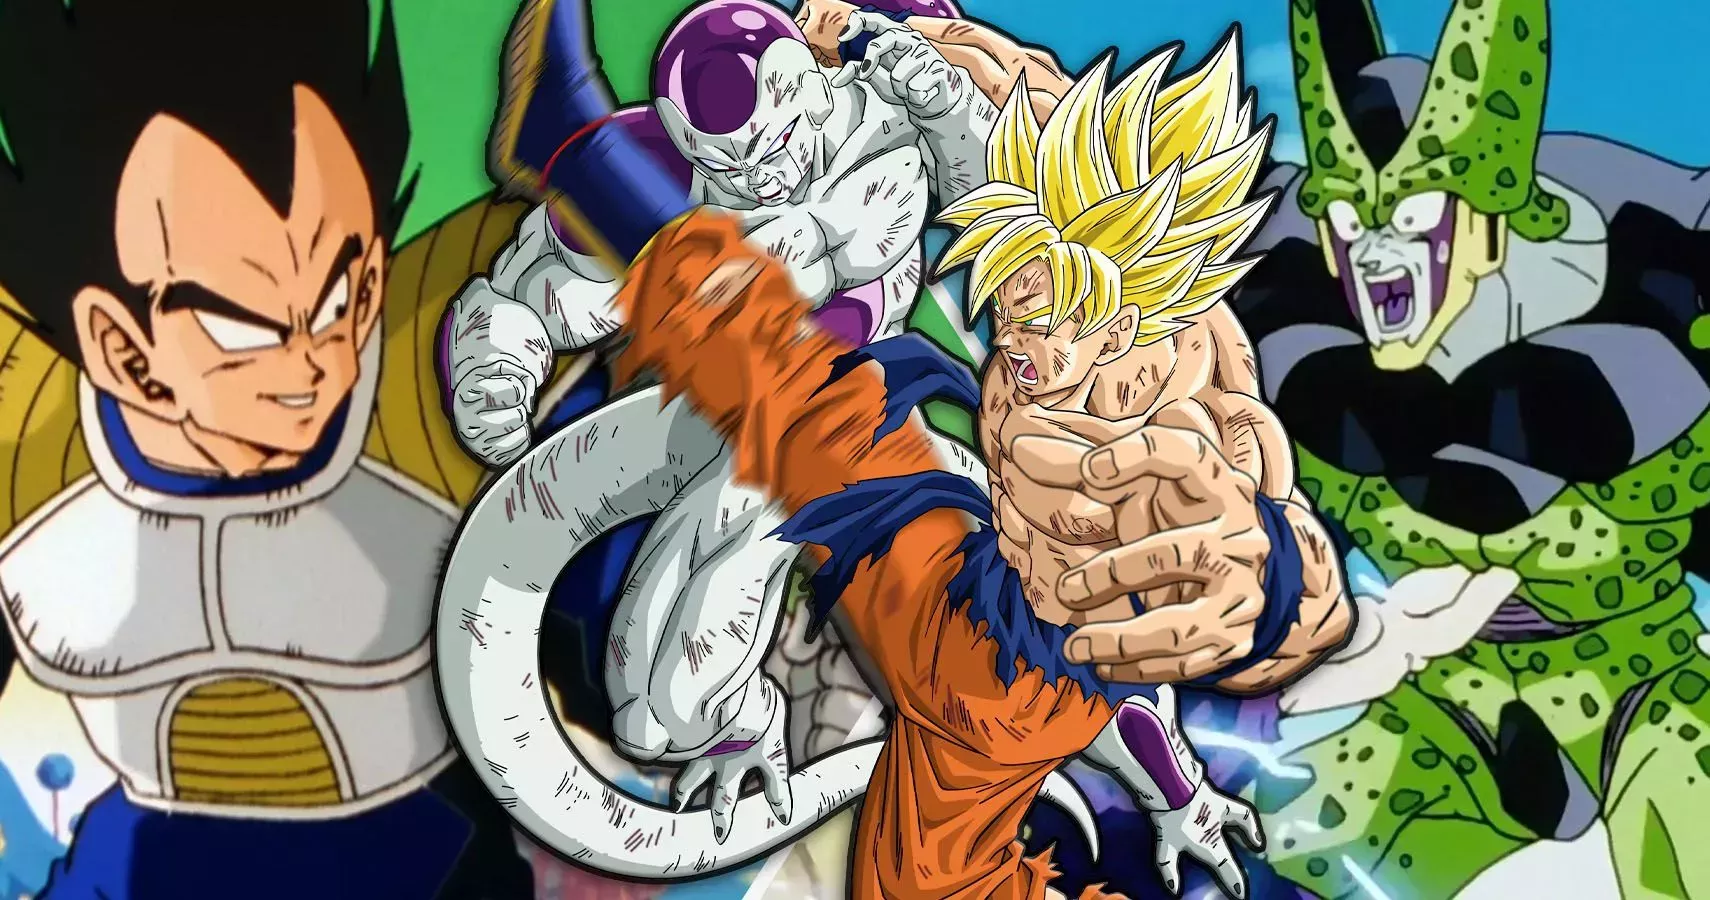 Goku and Frieza fighting against a 2 way split of Vegeta and Cell